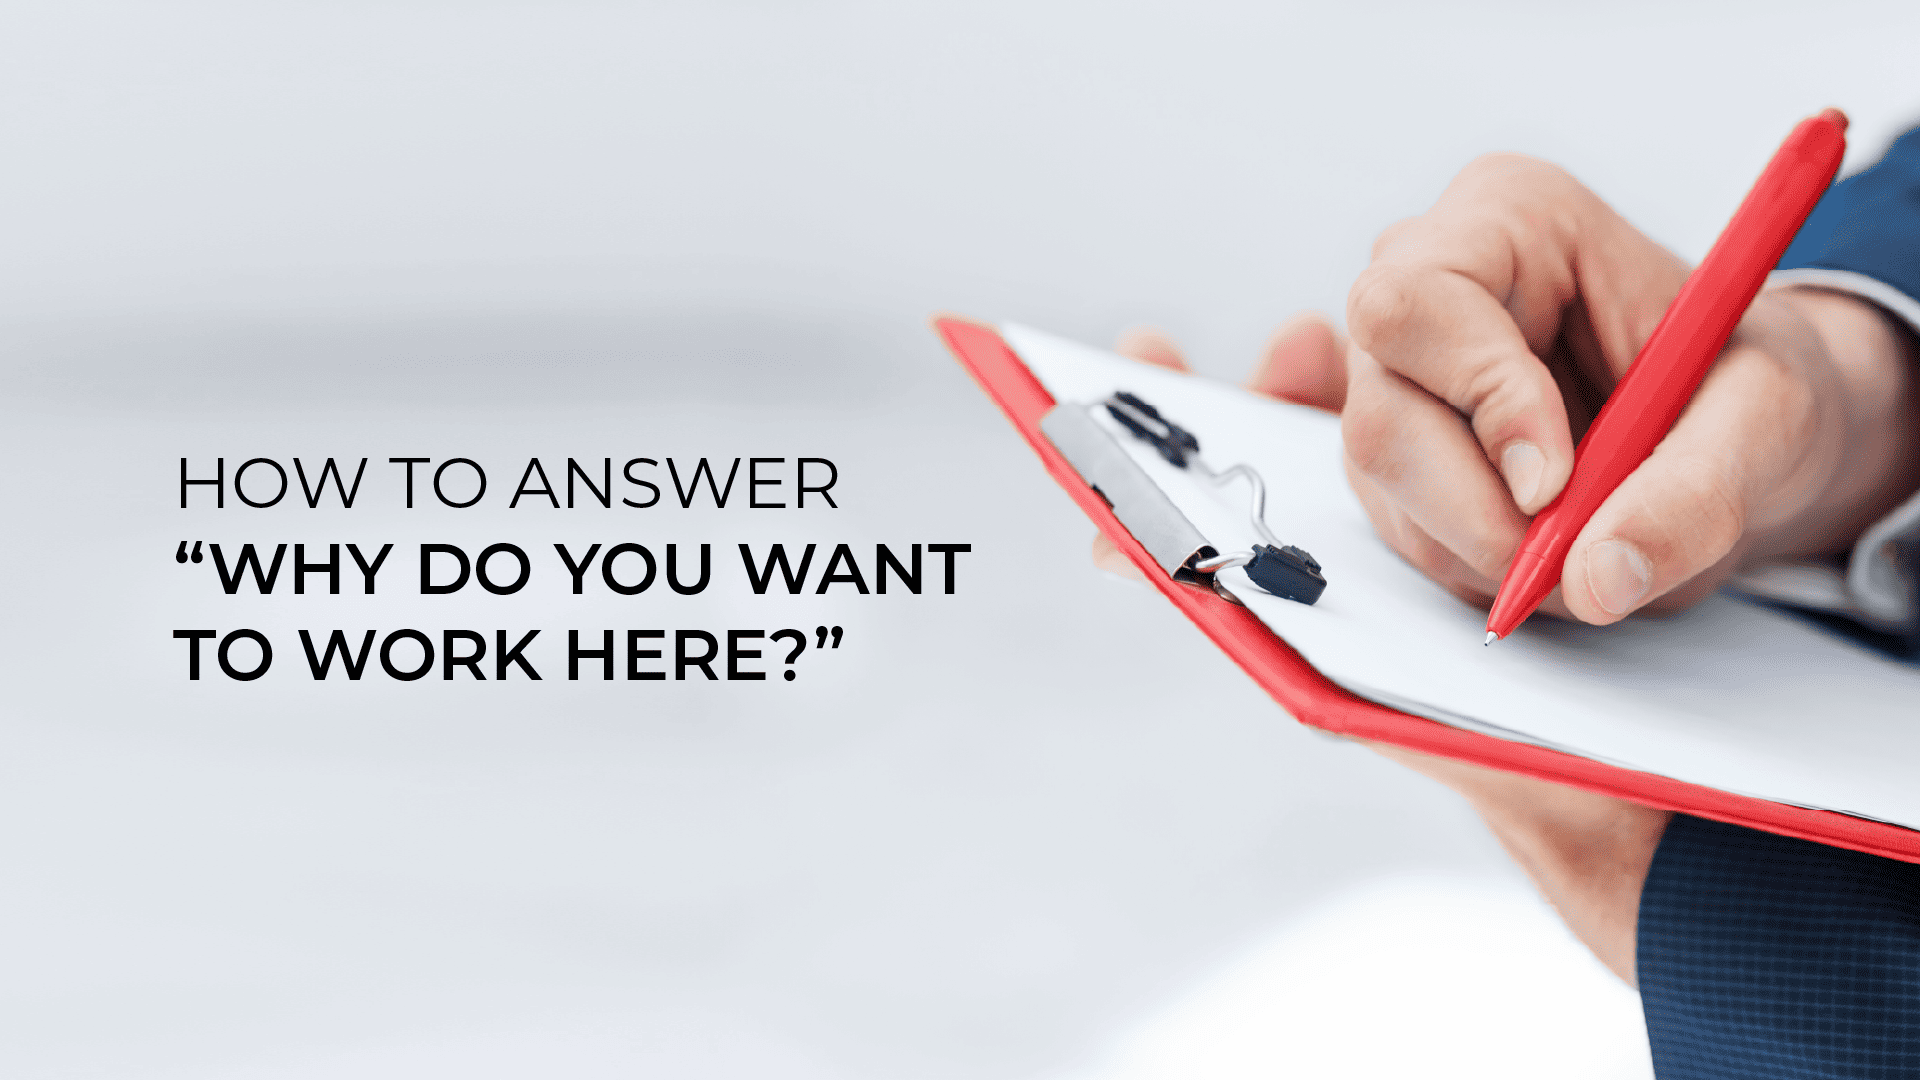 How to Answer “Why do You Want to Work Here?”